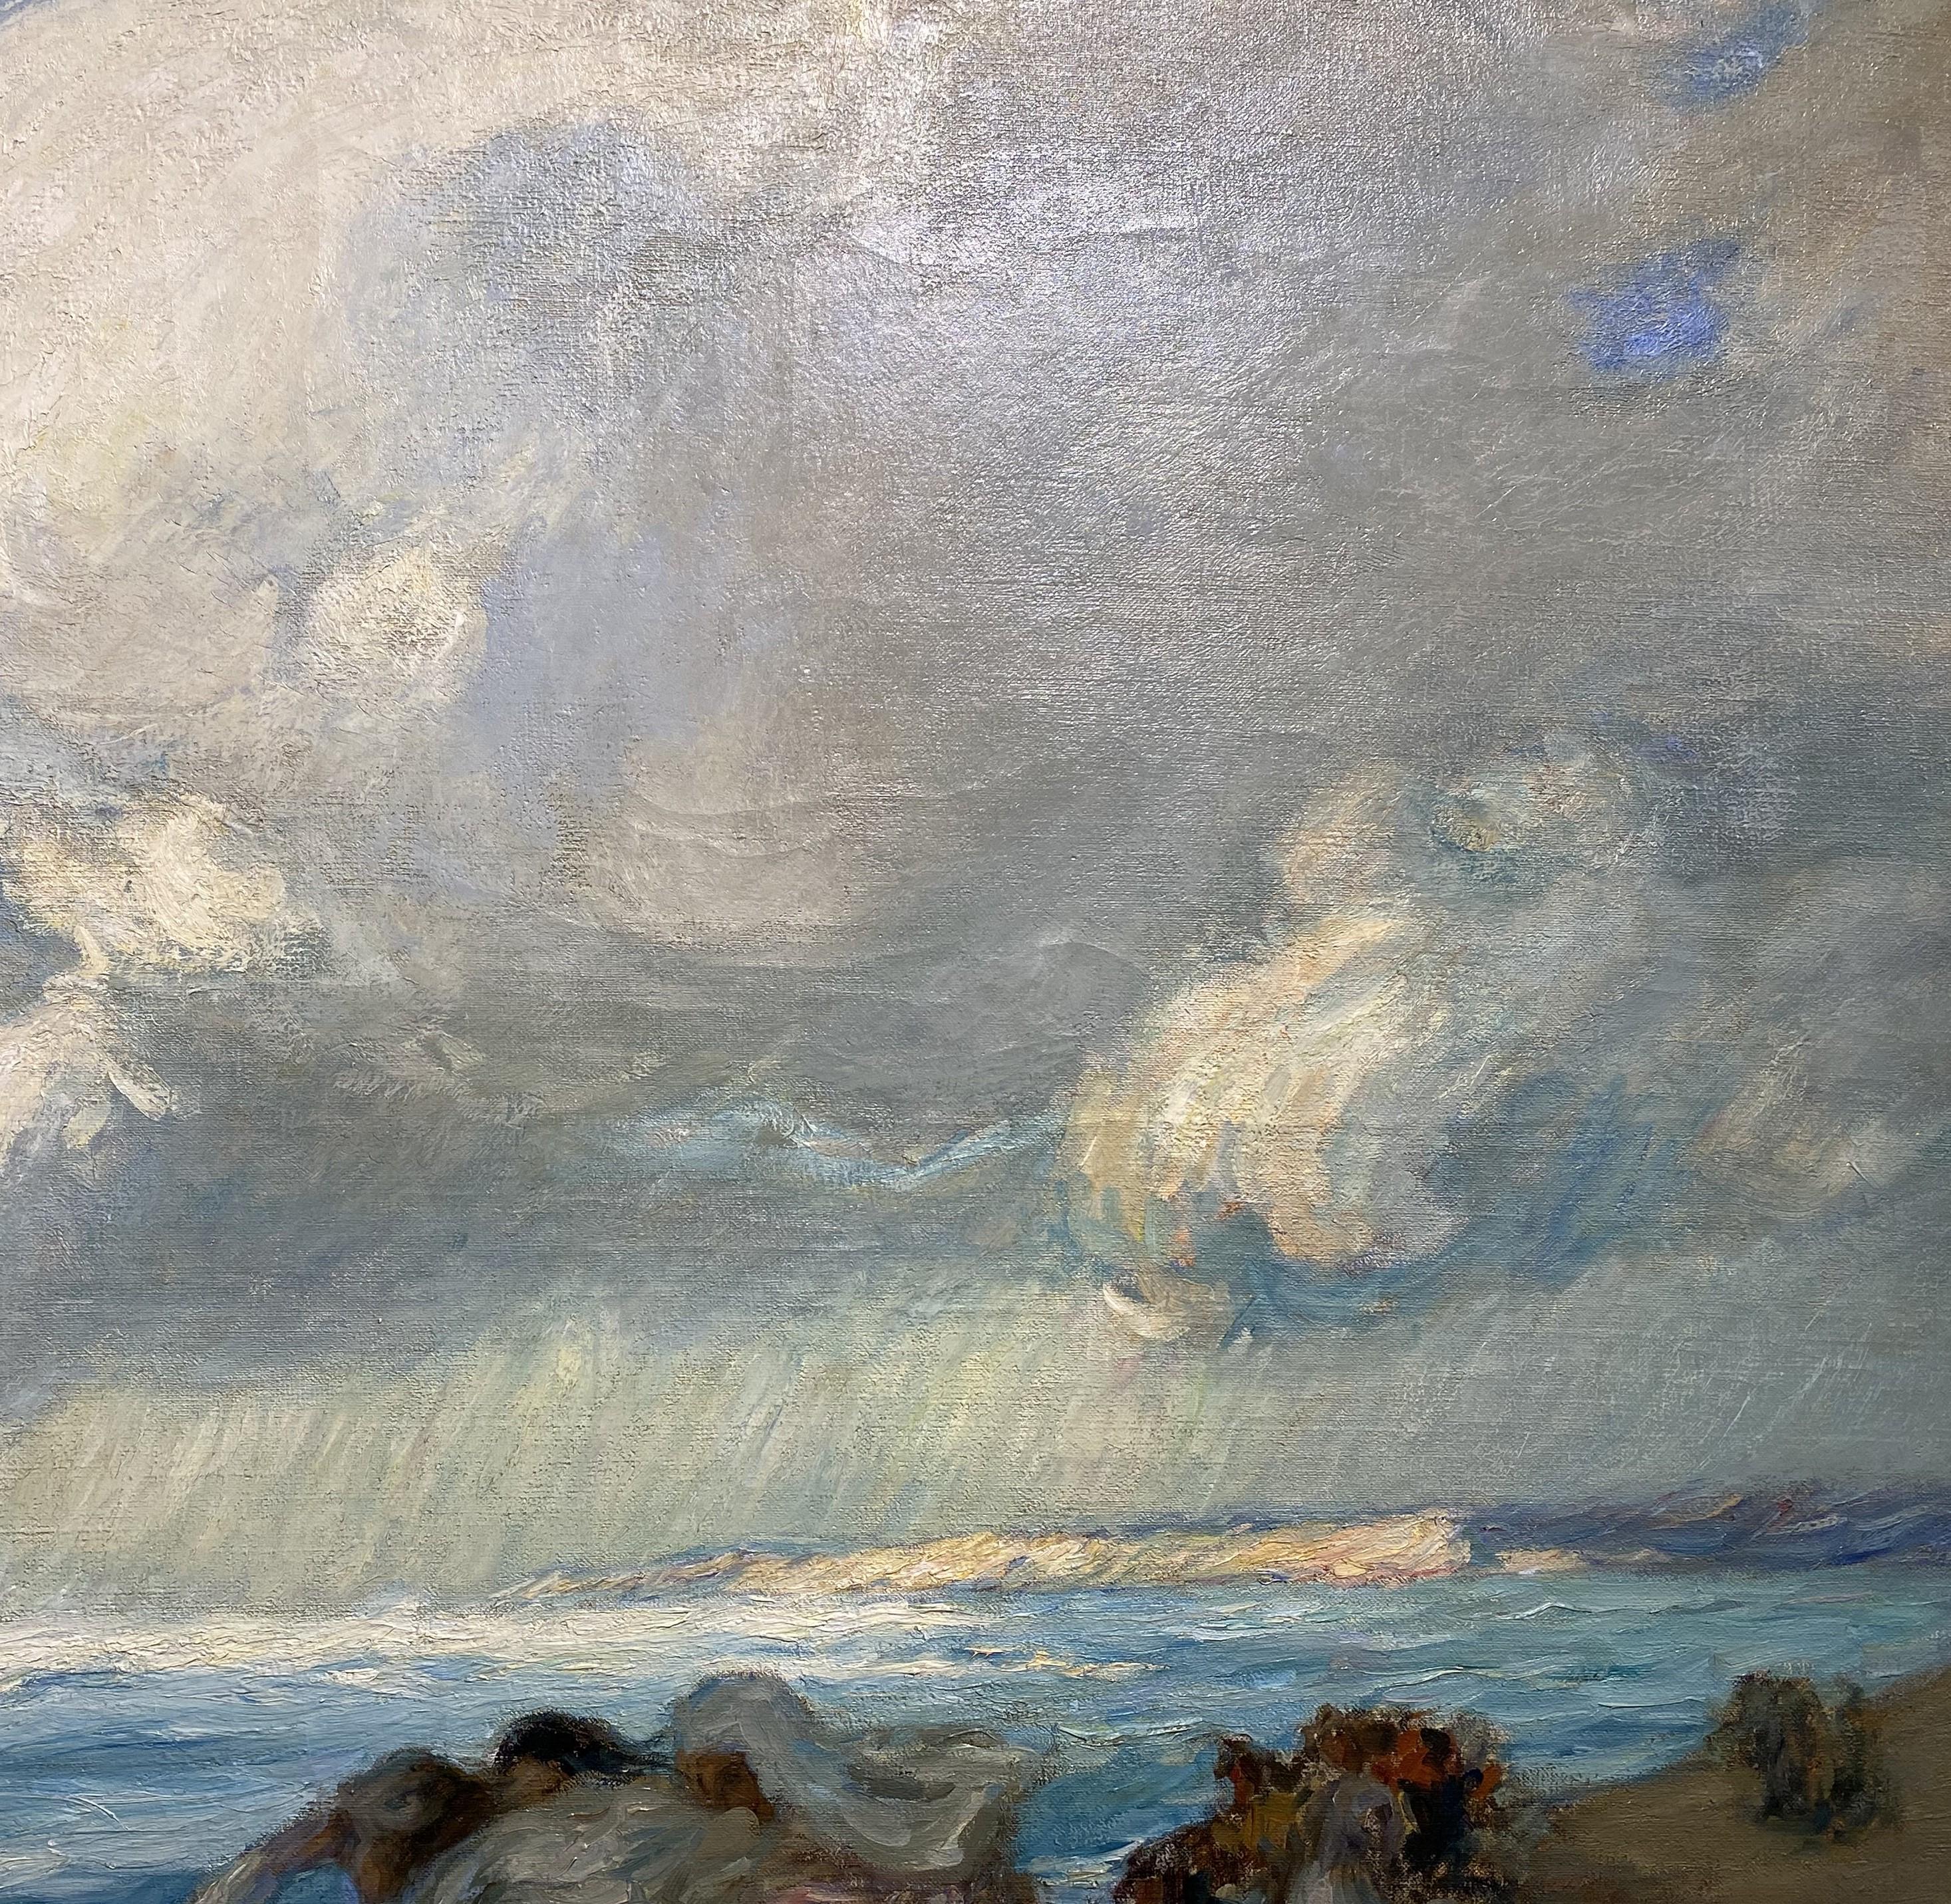 An exceptional impressionist beachside scene with figures and powerful clouds by American artist Augustus B. Koopman (1869-1914). Koopman was born in Charlotte, North Carolina, initially studied at the Pennsylvania Academy of Fine arts, and going on